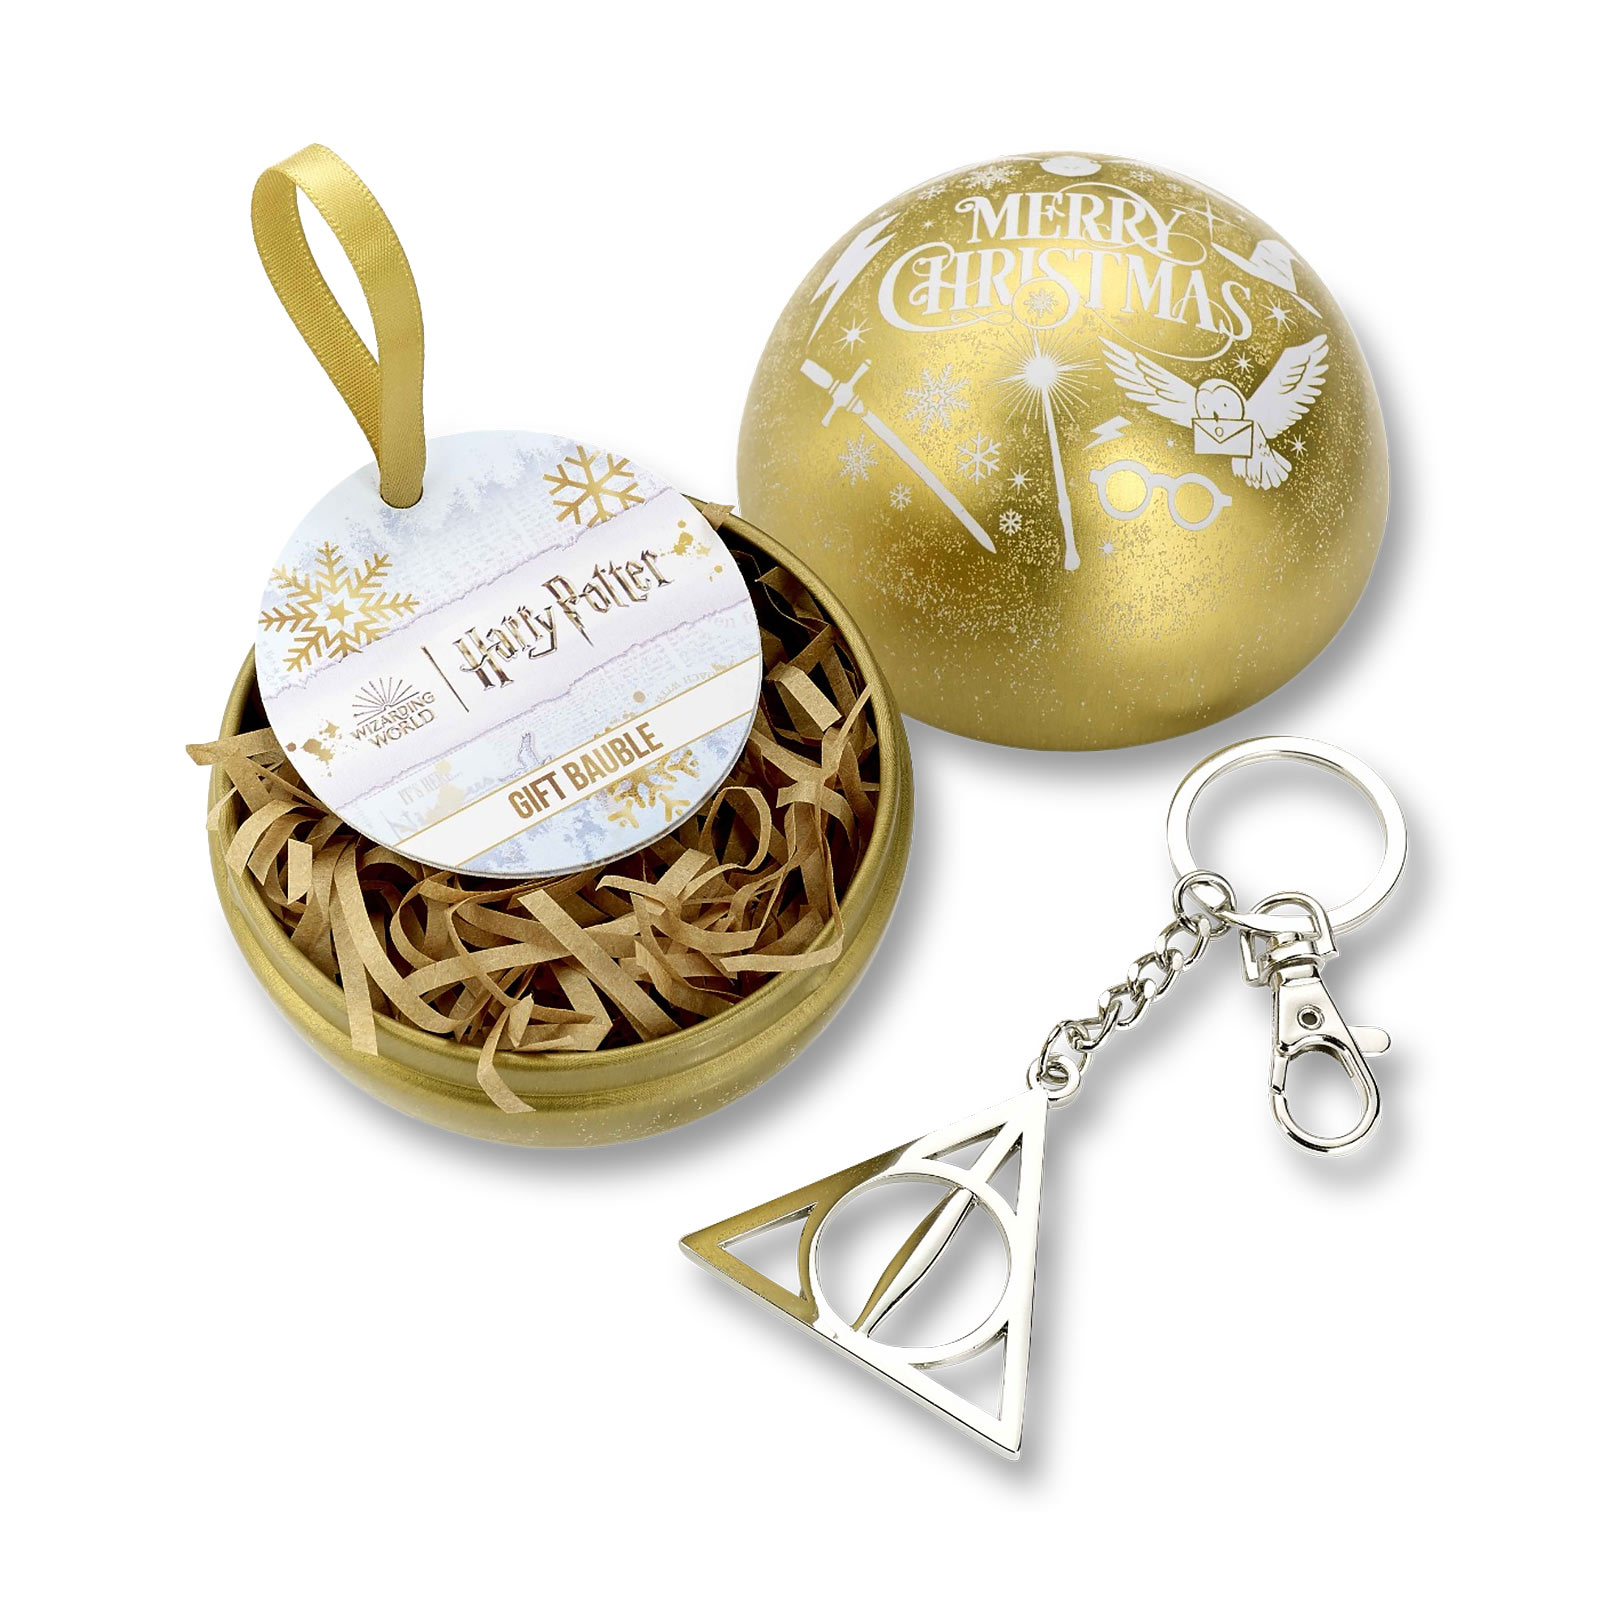 Harry Potter - Christmas ball with Deathly Hallows keychain